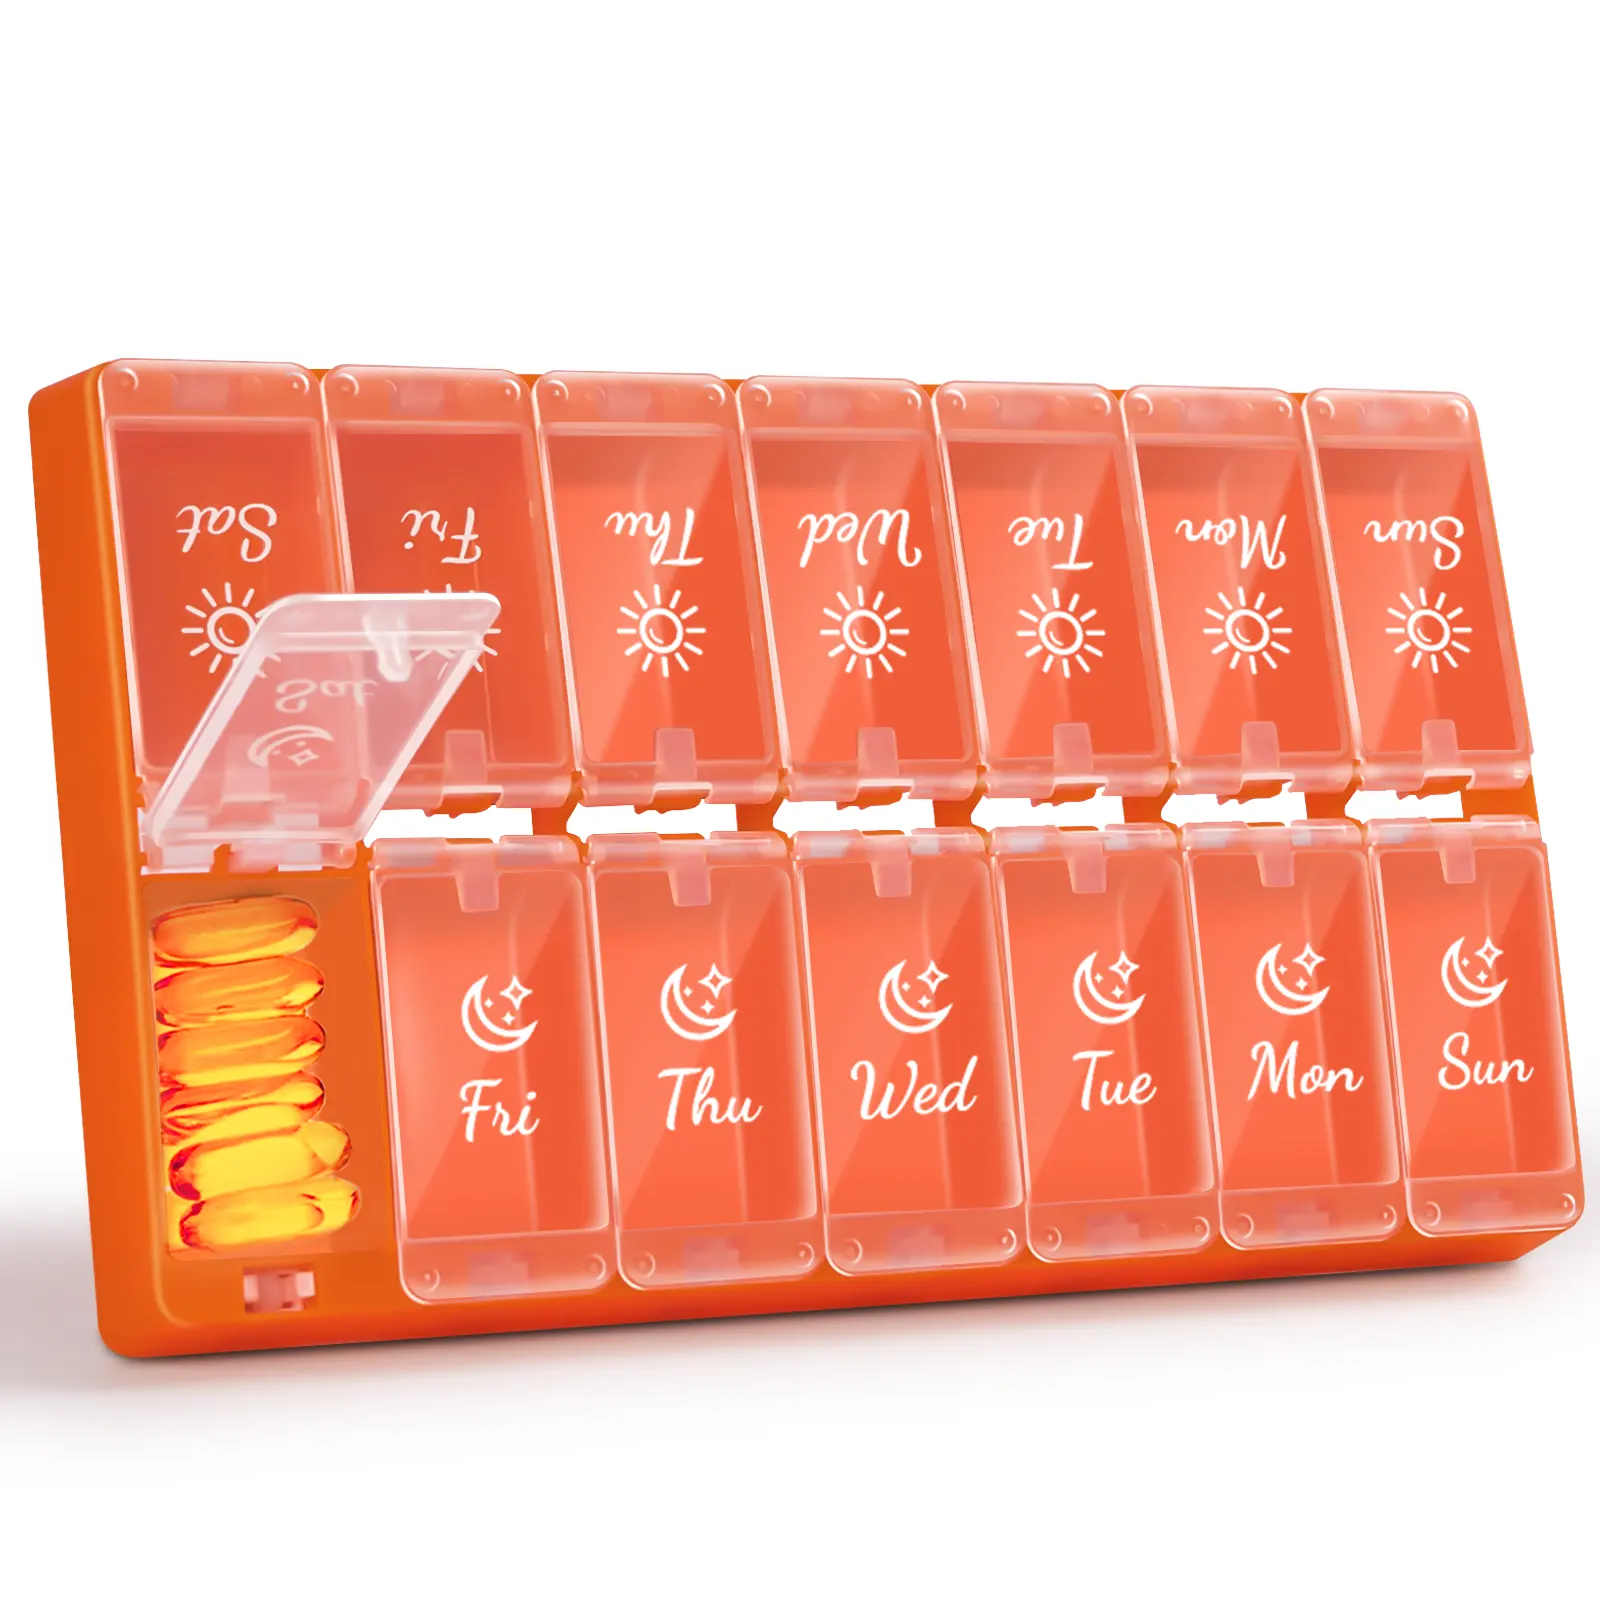 Weekly Pill Case with 14 compartment XL Medicine Storage Organizer for AM PM Pill Box Holder 7 Days Food Grade Material BPA Free